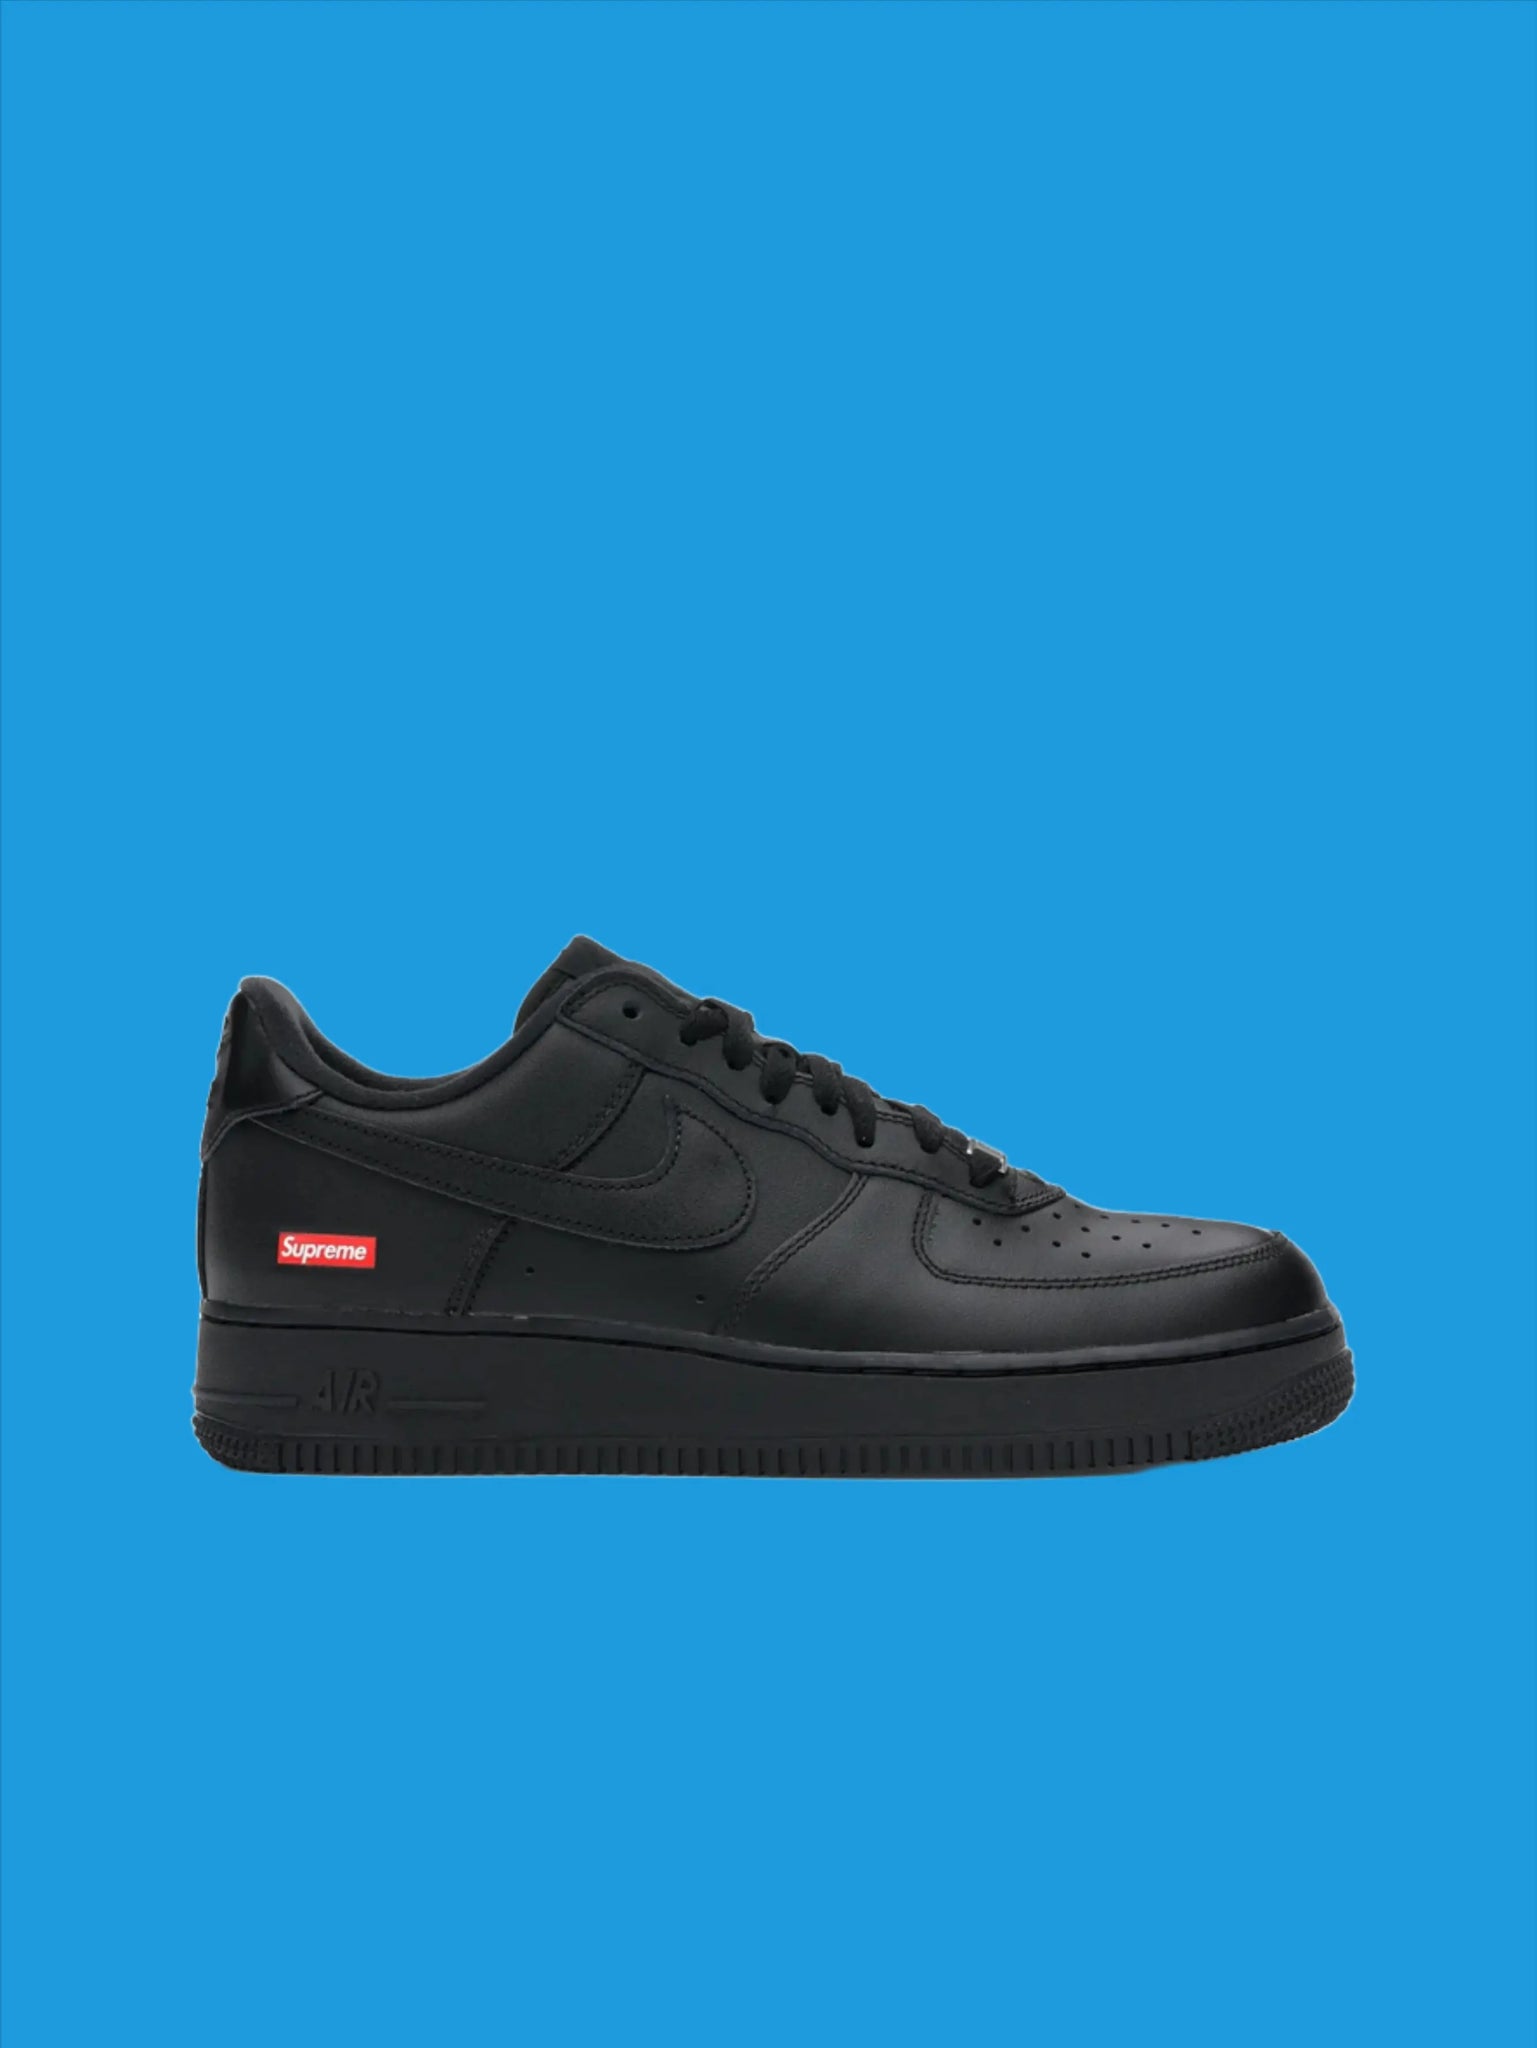 Nike Air Force 1 Low Supreme Black in Auckland, New Zealand - Shop name